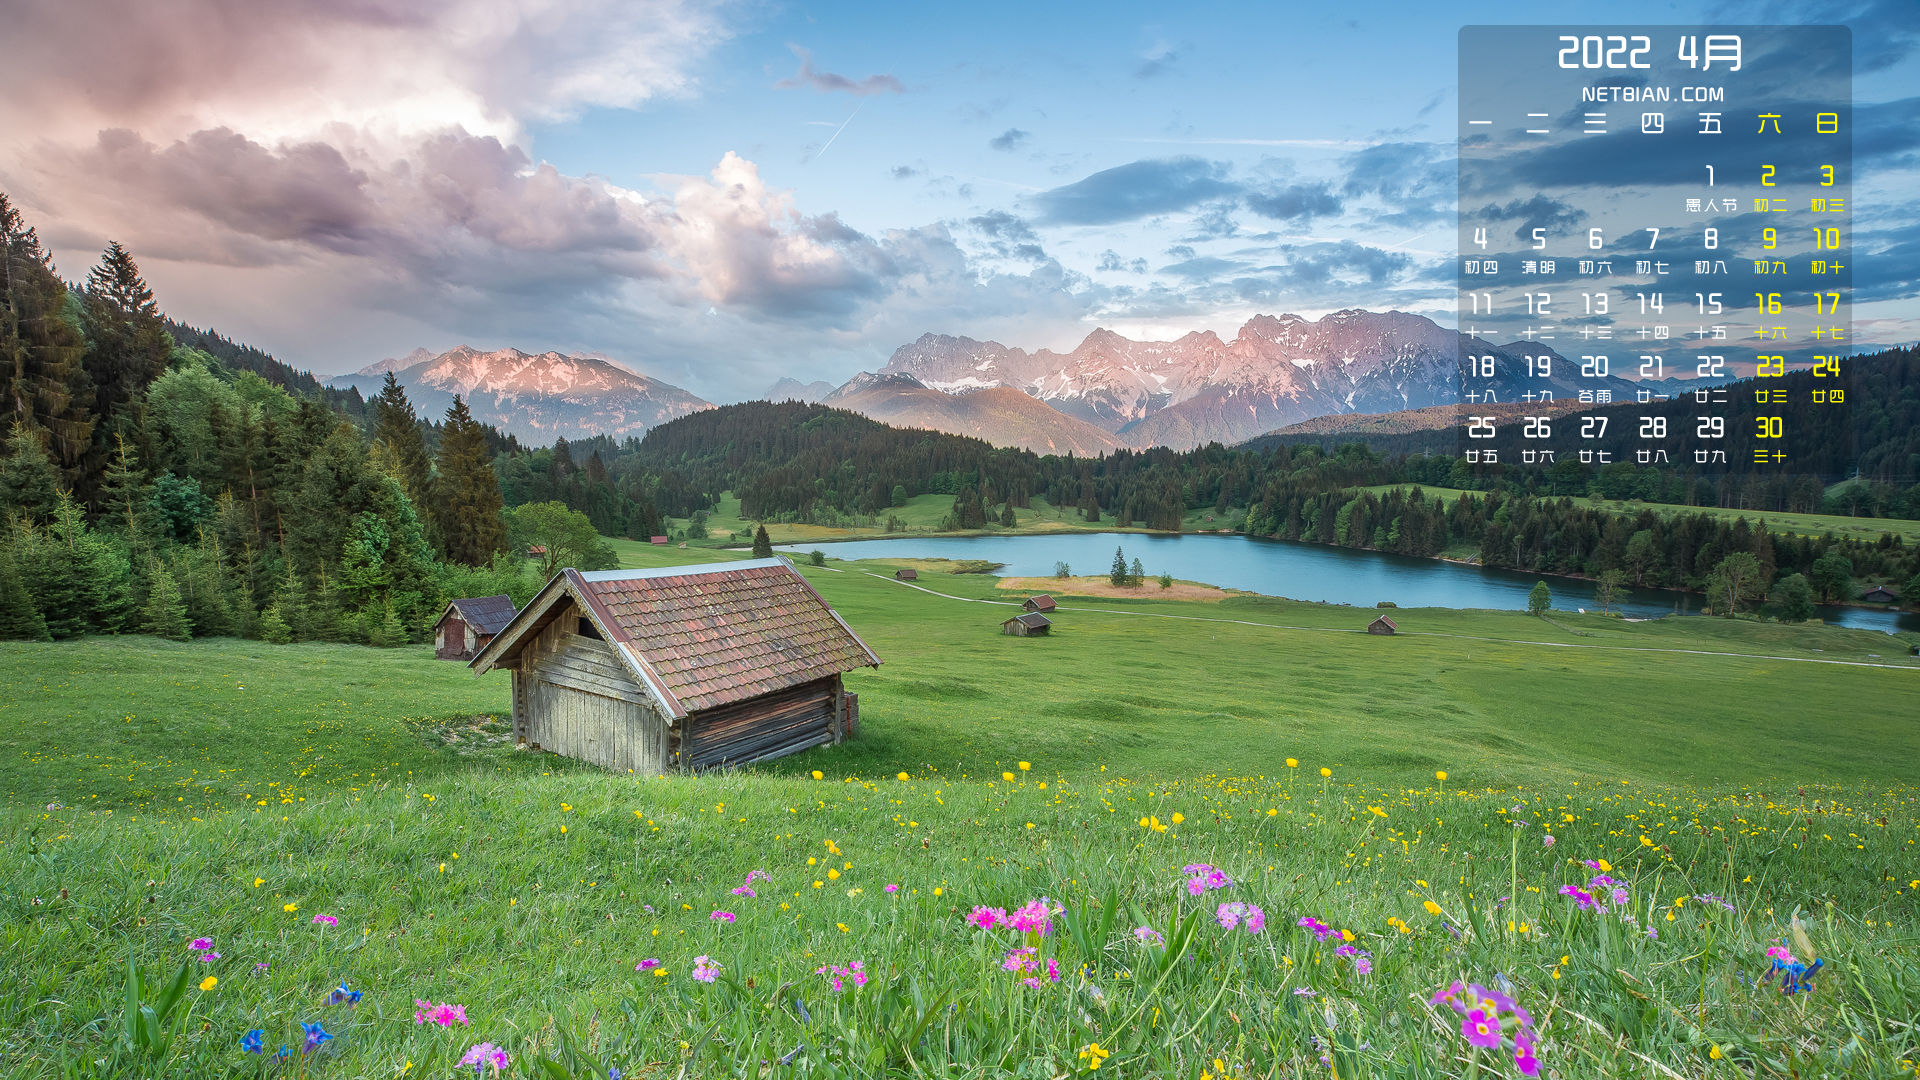 General 1920x1080 calendar water sky clouds flowers grass cottage trees nature mountains snow